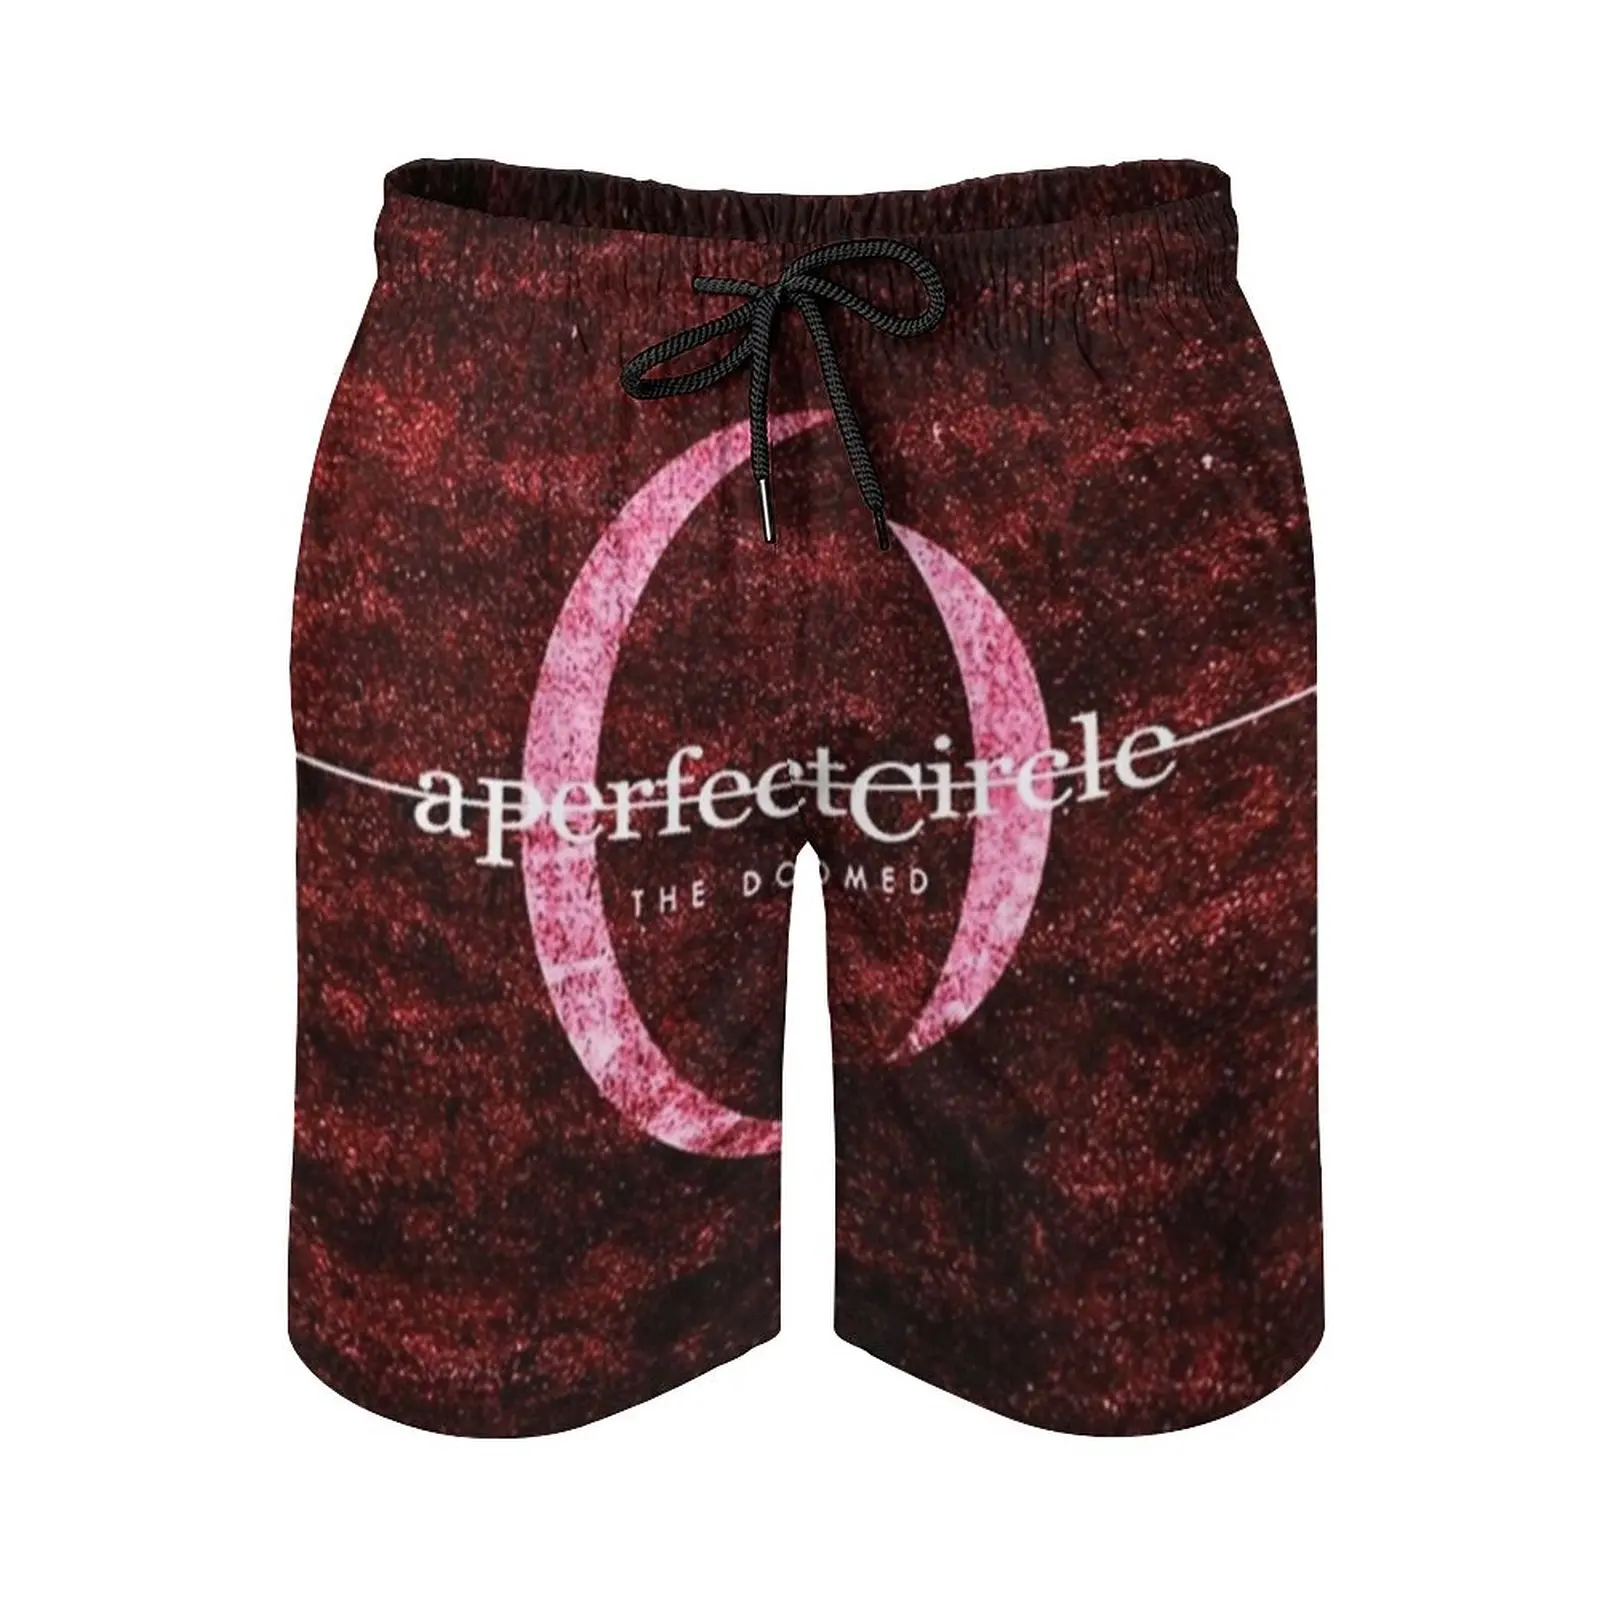 

Psychedelic Rock Metal Alex Grey Men's Beach Shorts With Mesh Lining Surfing Pants Swim Trunks Graphic Shocks Best Seller Zac